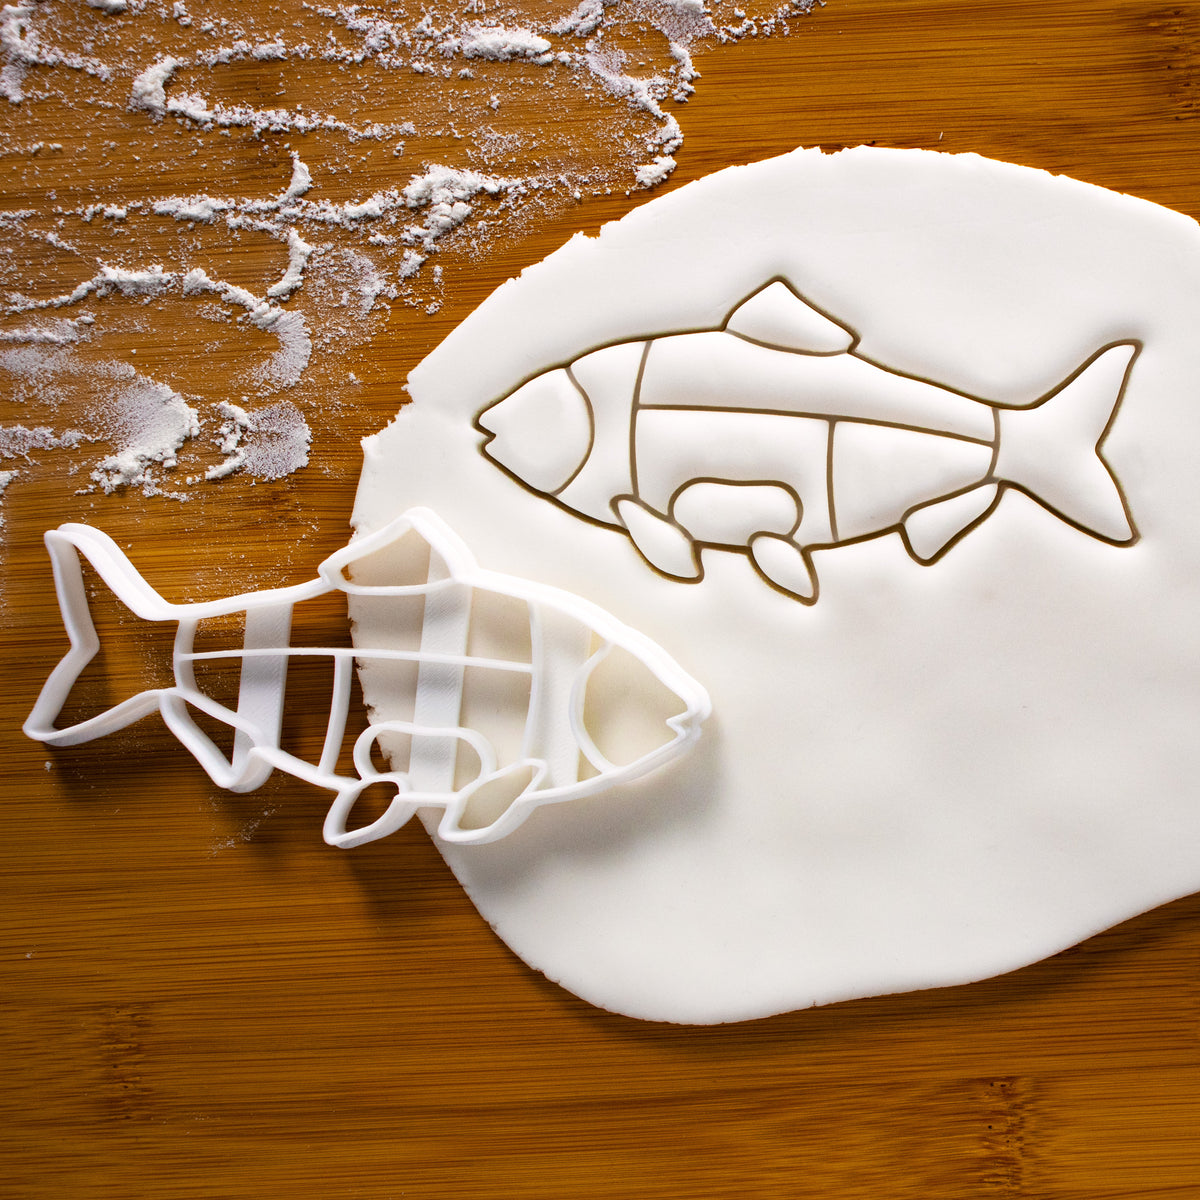 Butcher Fish Chart cookie cutter pressed on fondant